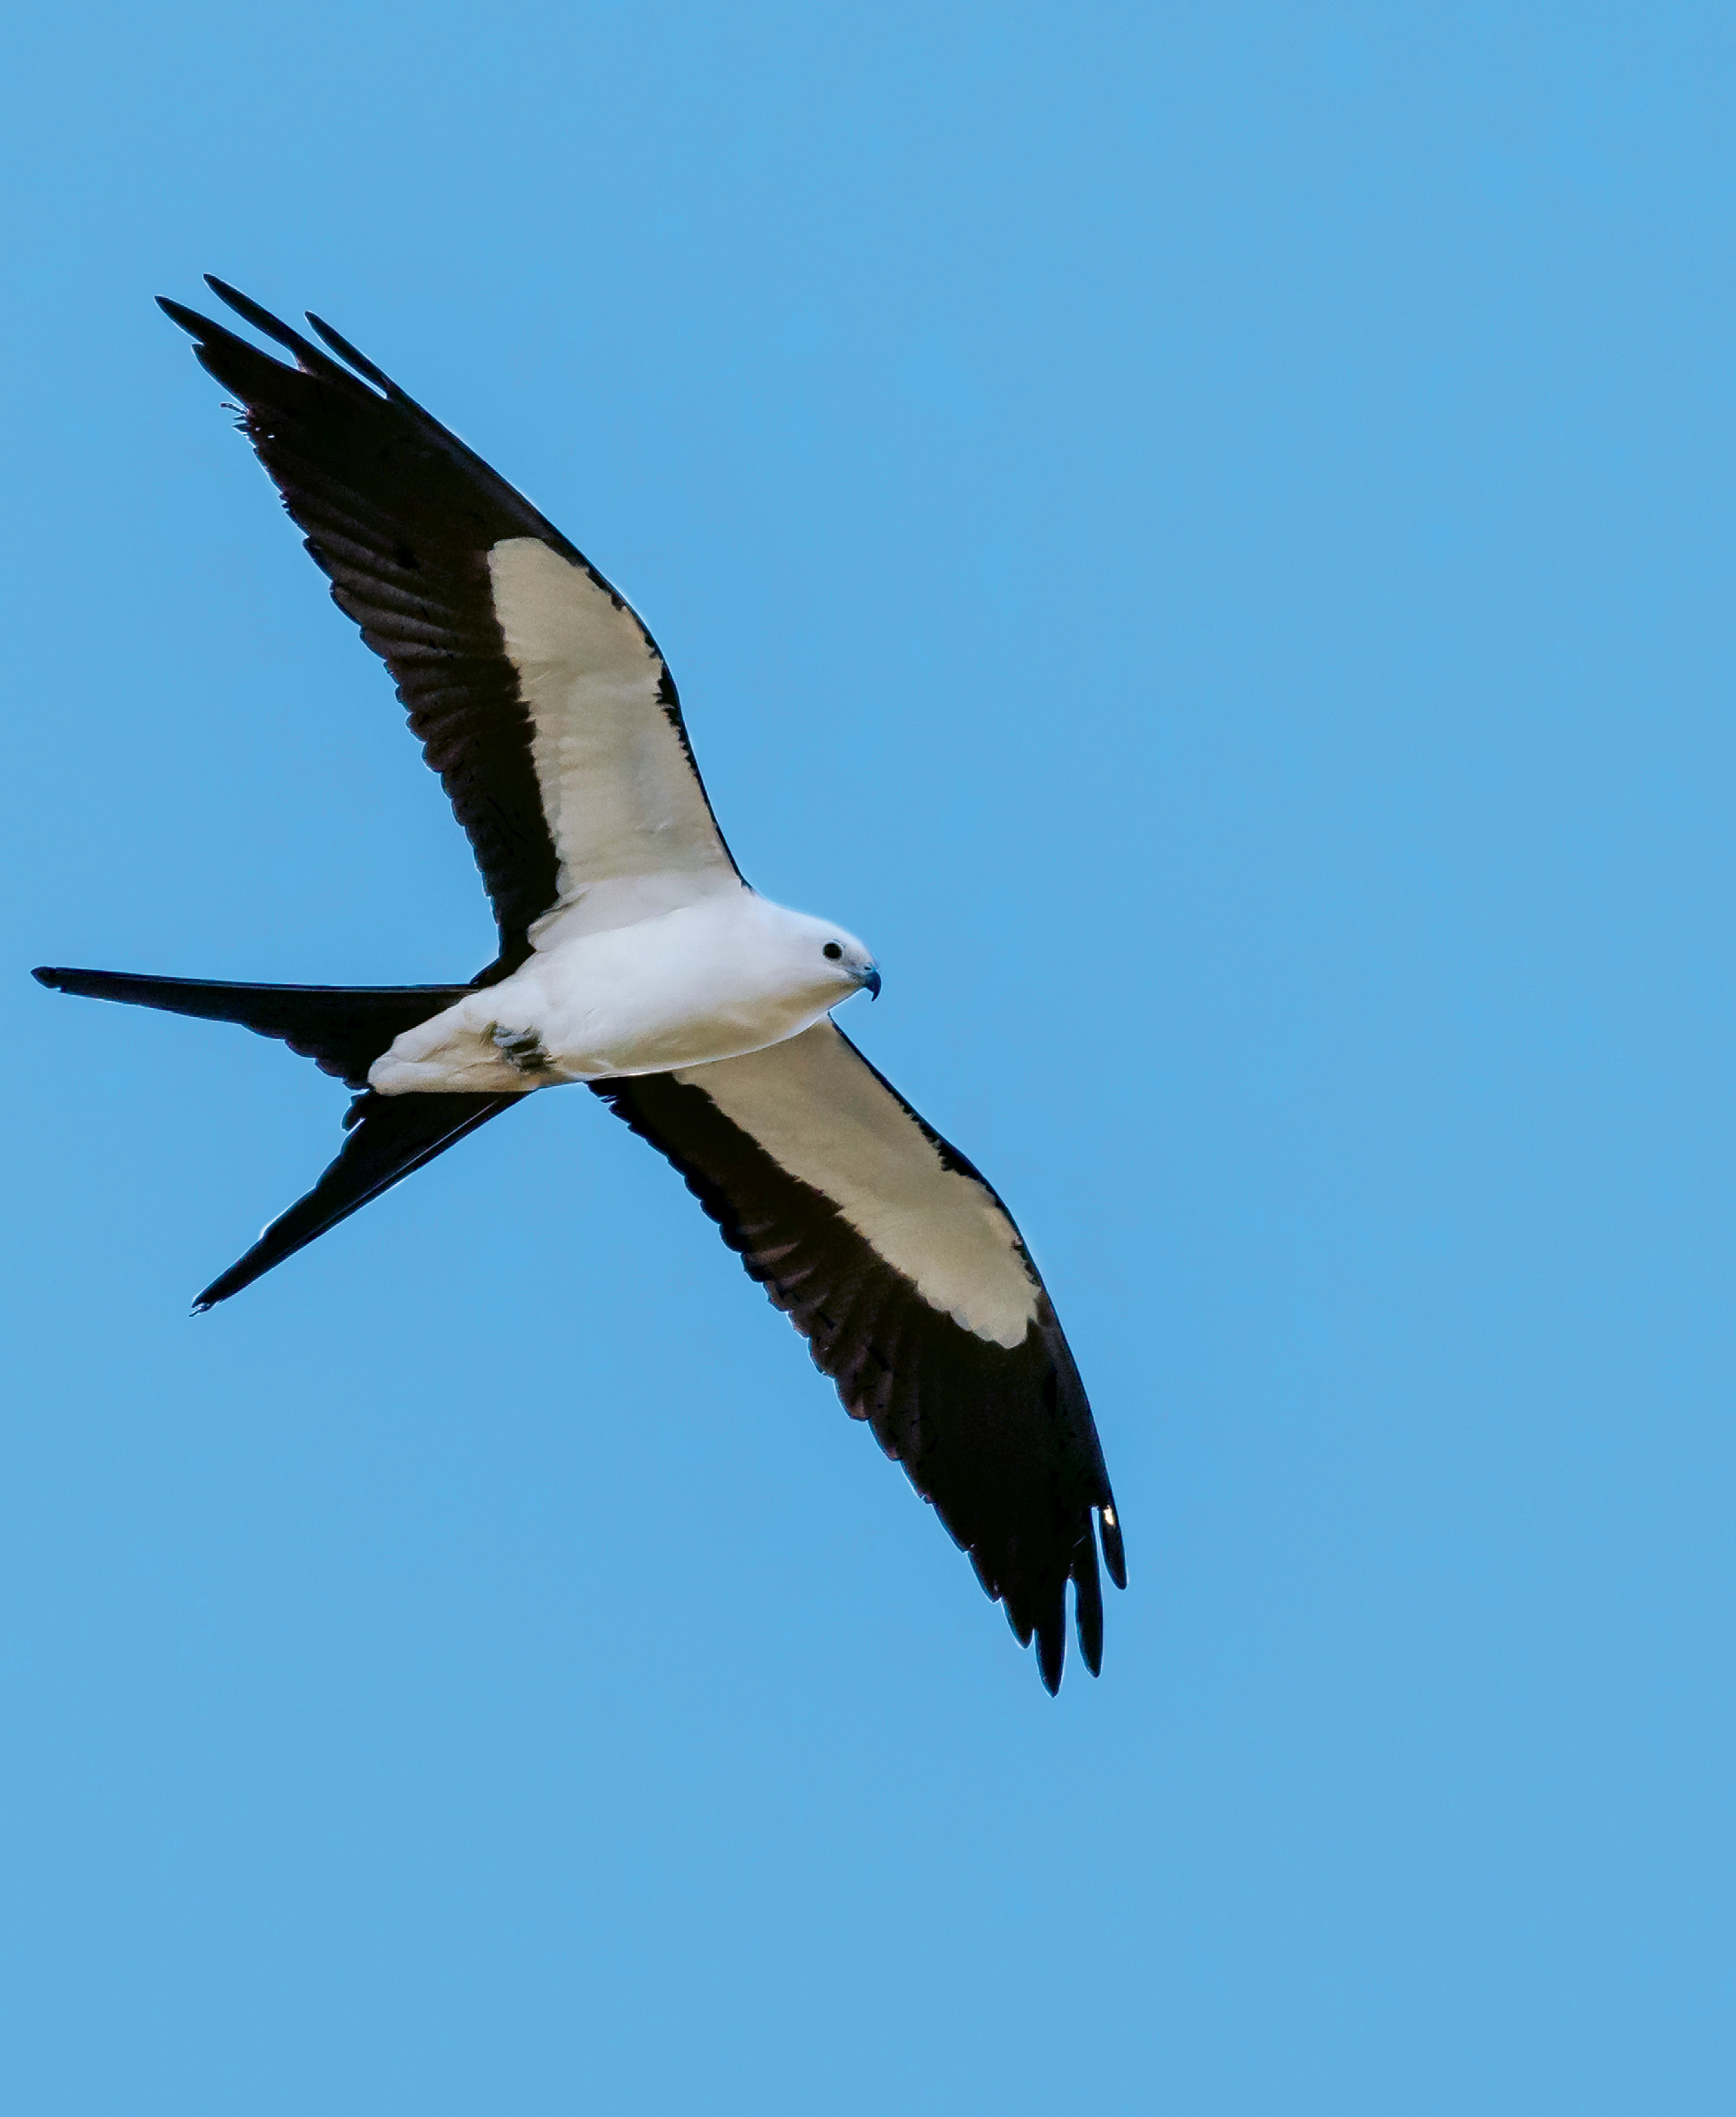 Swallow-Tailed Kite (Elanoides forficatus) - Locally, swallow-tailed kites are primarily spotted in large floodplain forests and swamps of the outer coastal plain, especially in the Francis Marion National Forest and on the Santee, Edisto, and Savannah rivers; With a former breeding ground that included 21 states as far north as Minnesota, the swallow-tailed kite is now limited to seven or eight Southern states. Help South Carolina and the Center for Birds of Prey monitor their distribution and population trends by reporting sightings at <a href="http://www.thecenterforbirdsofprey.org/">http://www.thecenterforbirdsofprey.org/</a>.